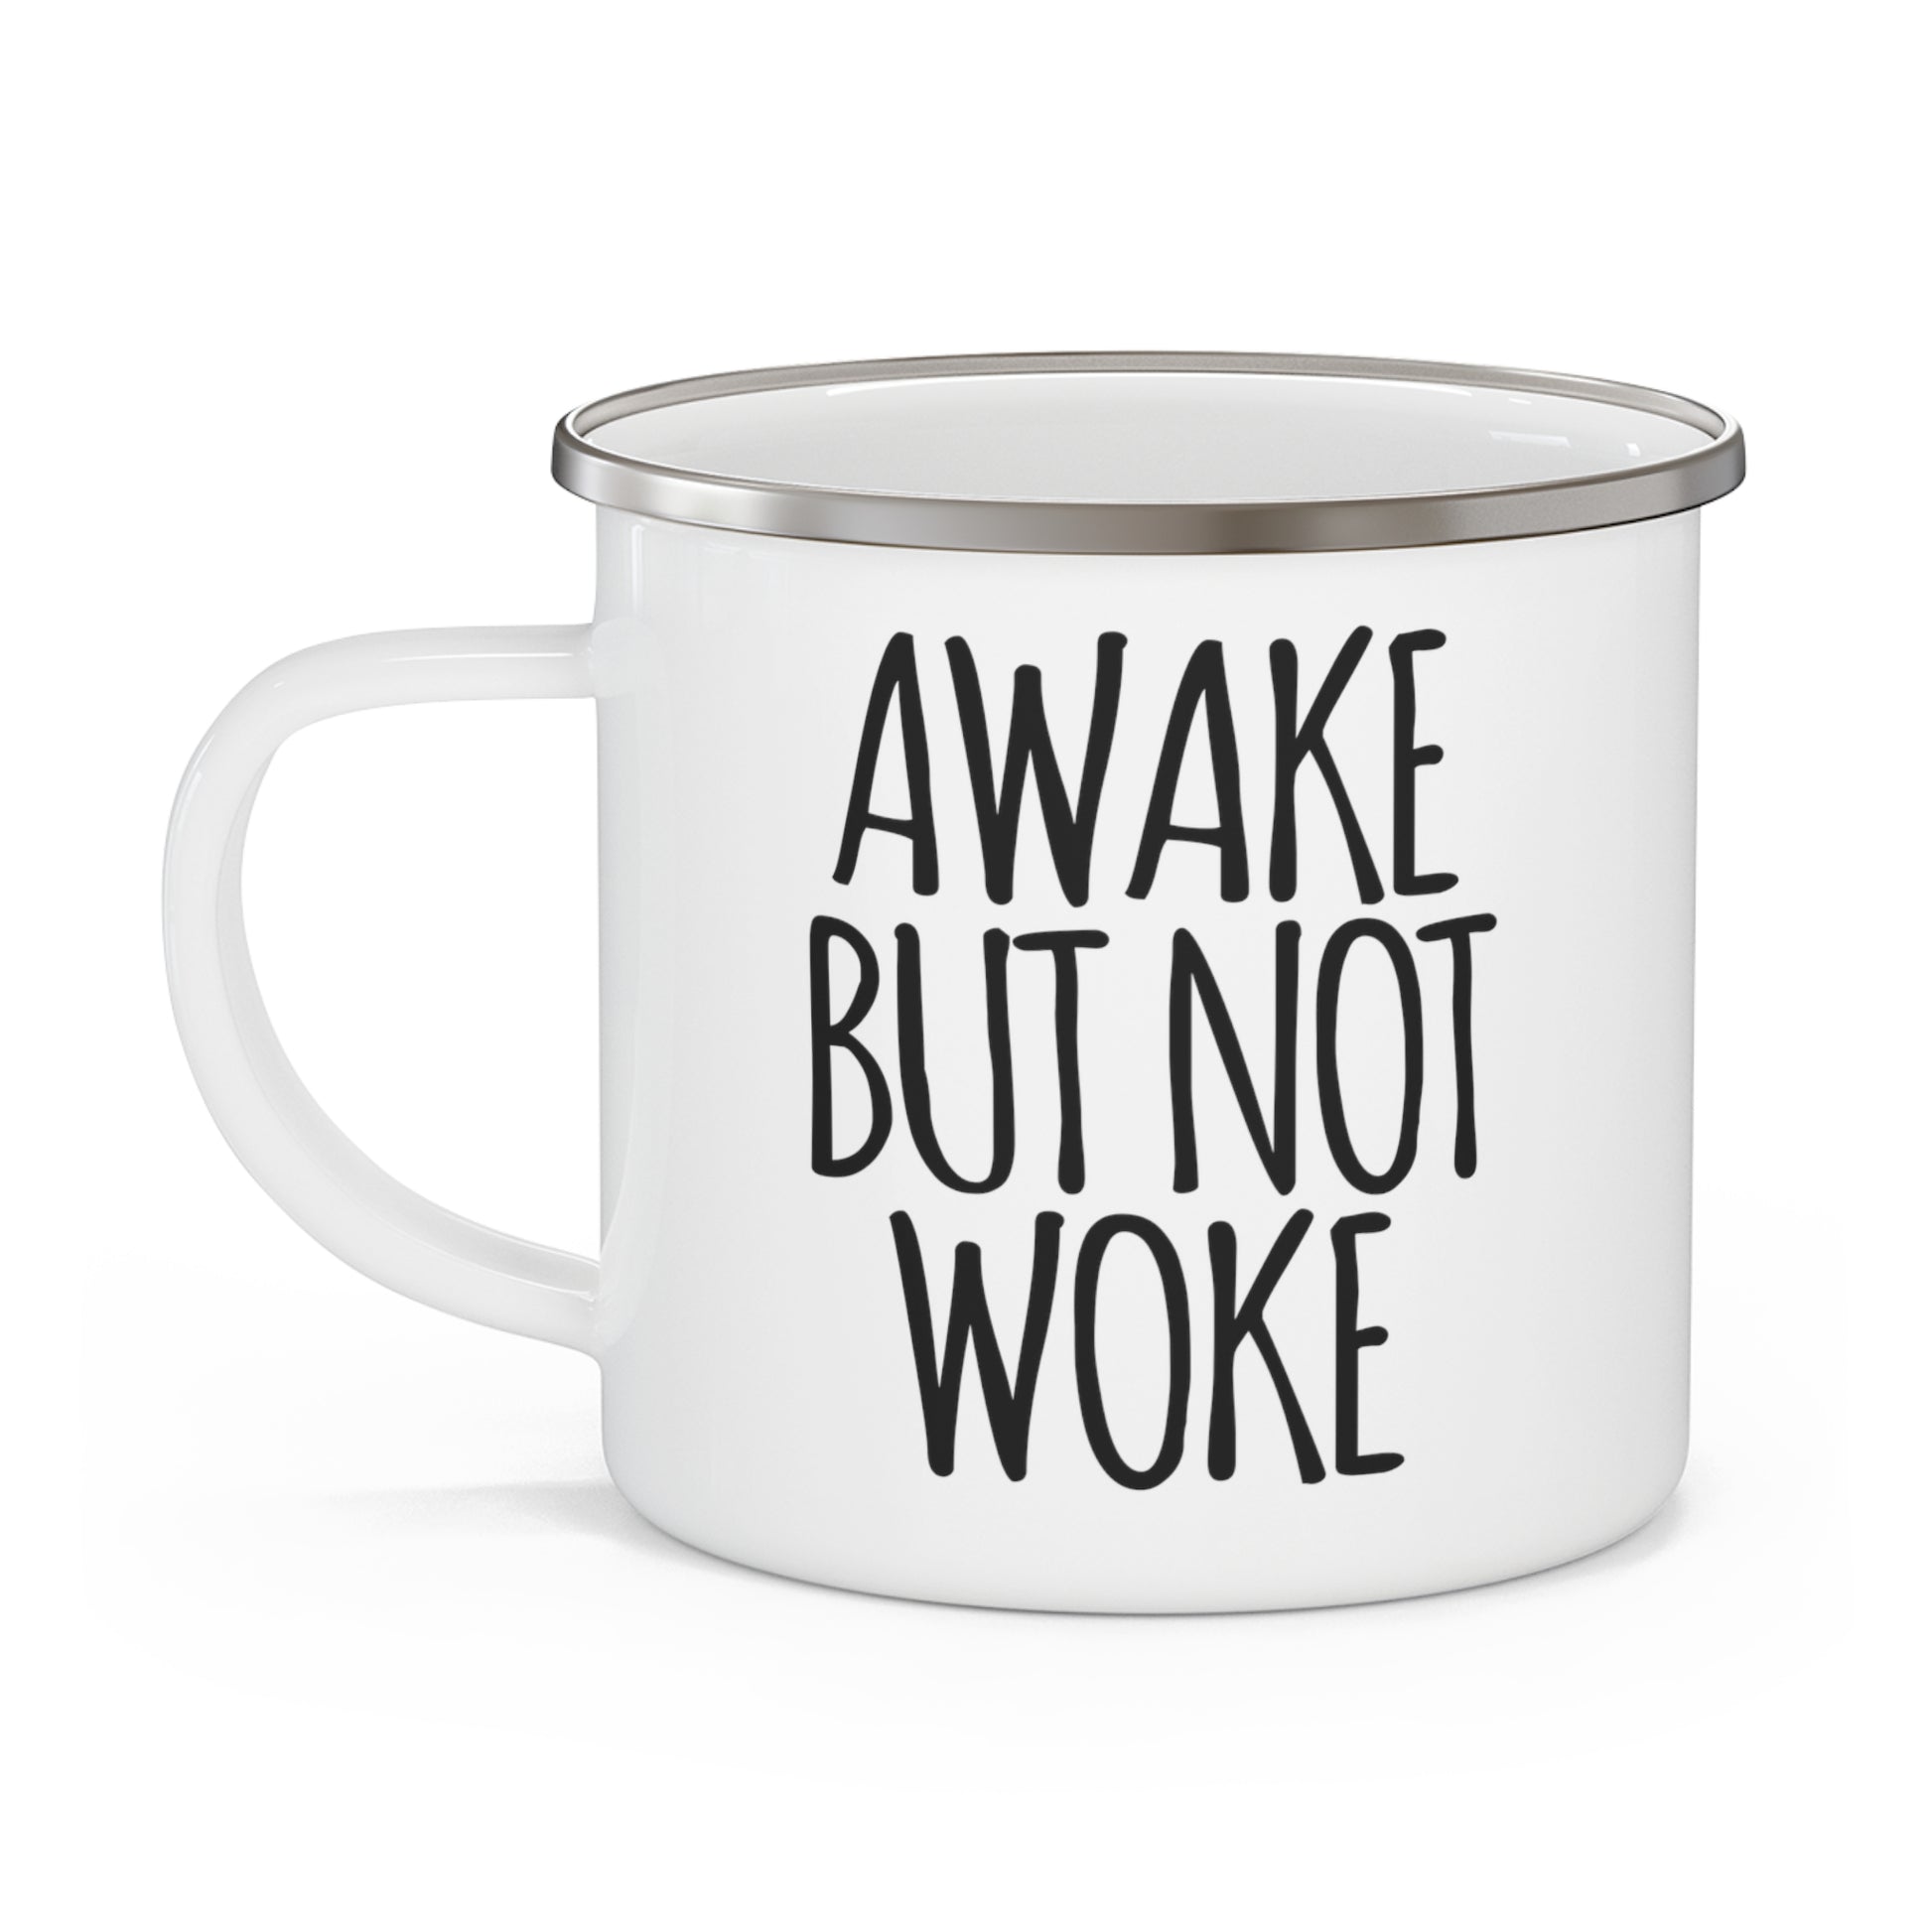 "Awake But Not Woke" Funny Political Humor Mug, Sarcastic Coffee Mug, Unique Quote Cup, Gift for Friends, Office Humor, Gag Gift - News For Reasonable People